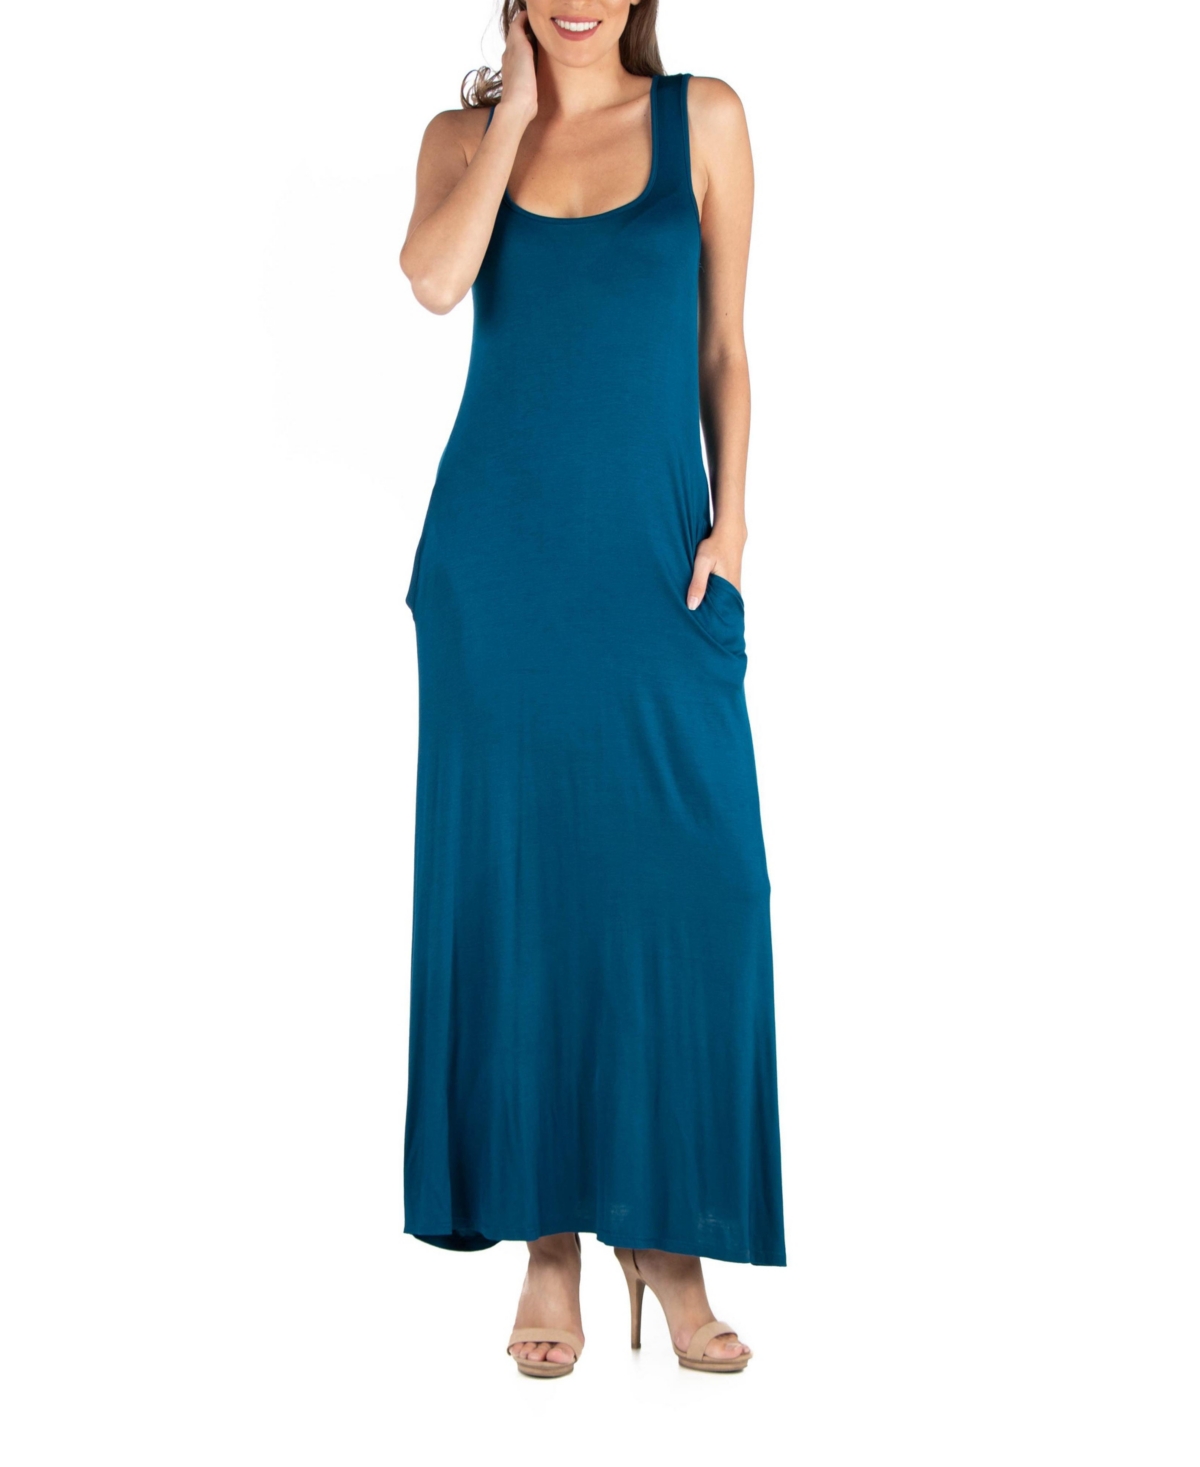 Women's Scoop Neck Sleeveless Maxi Dress with Pockets - Teal